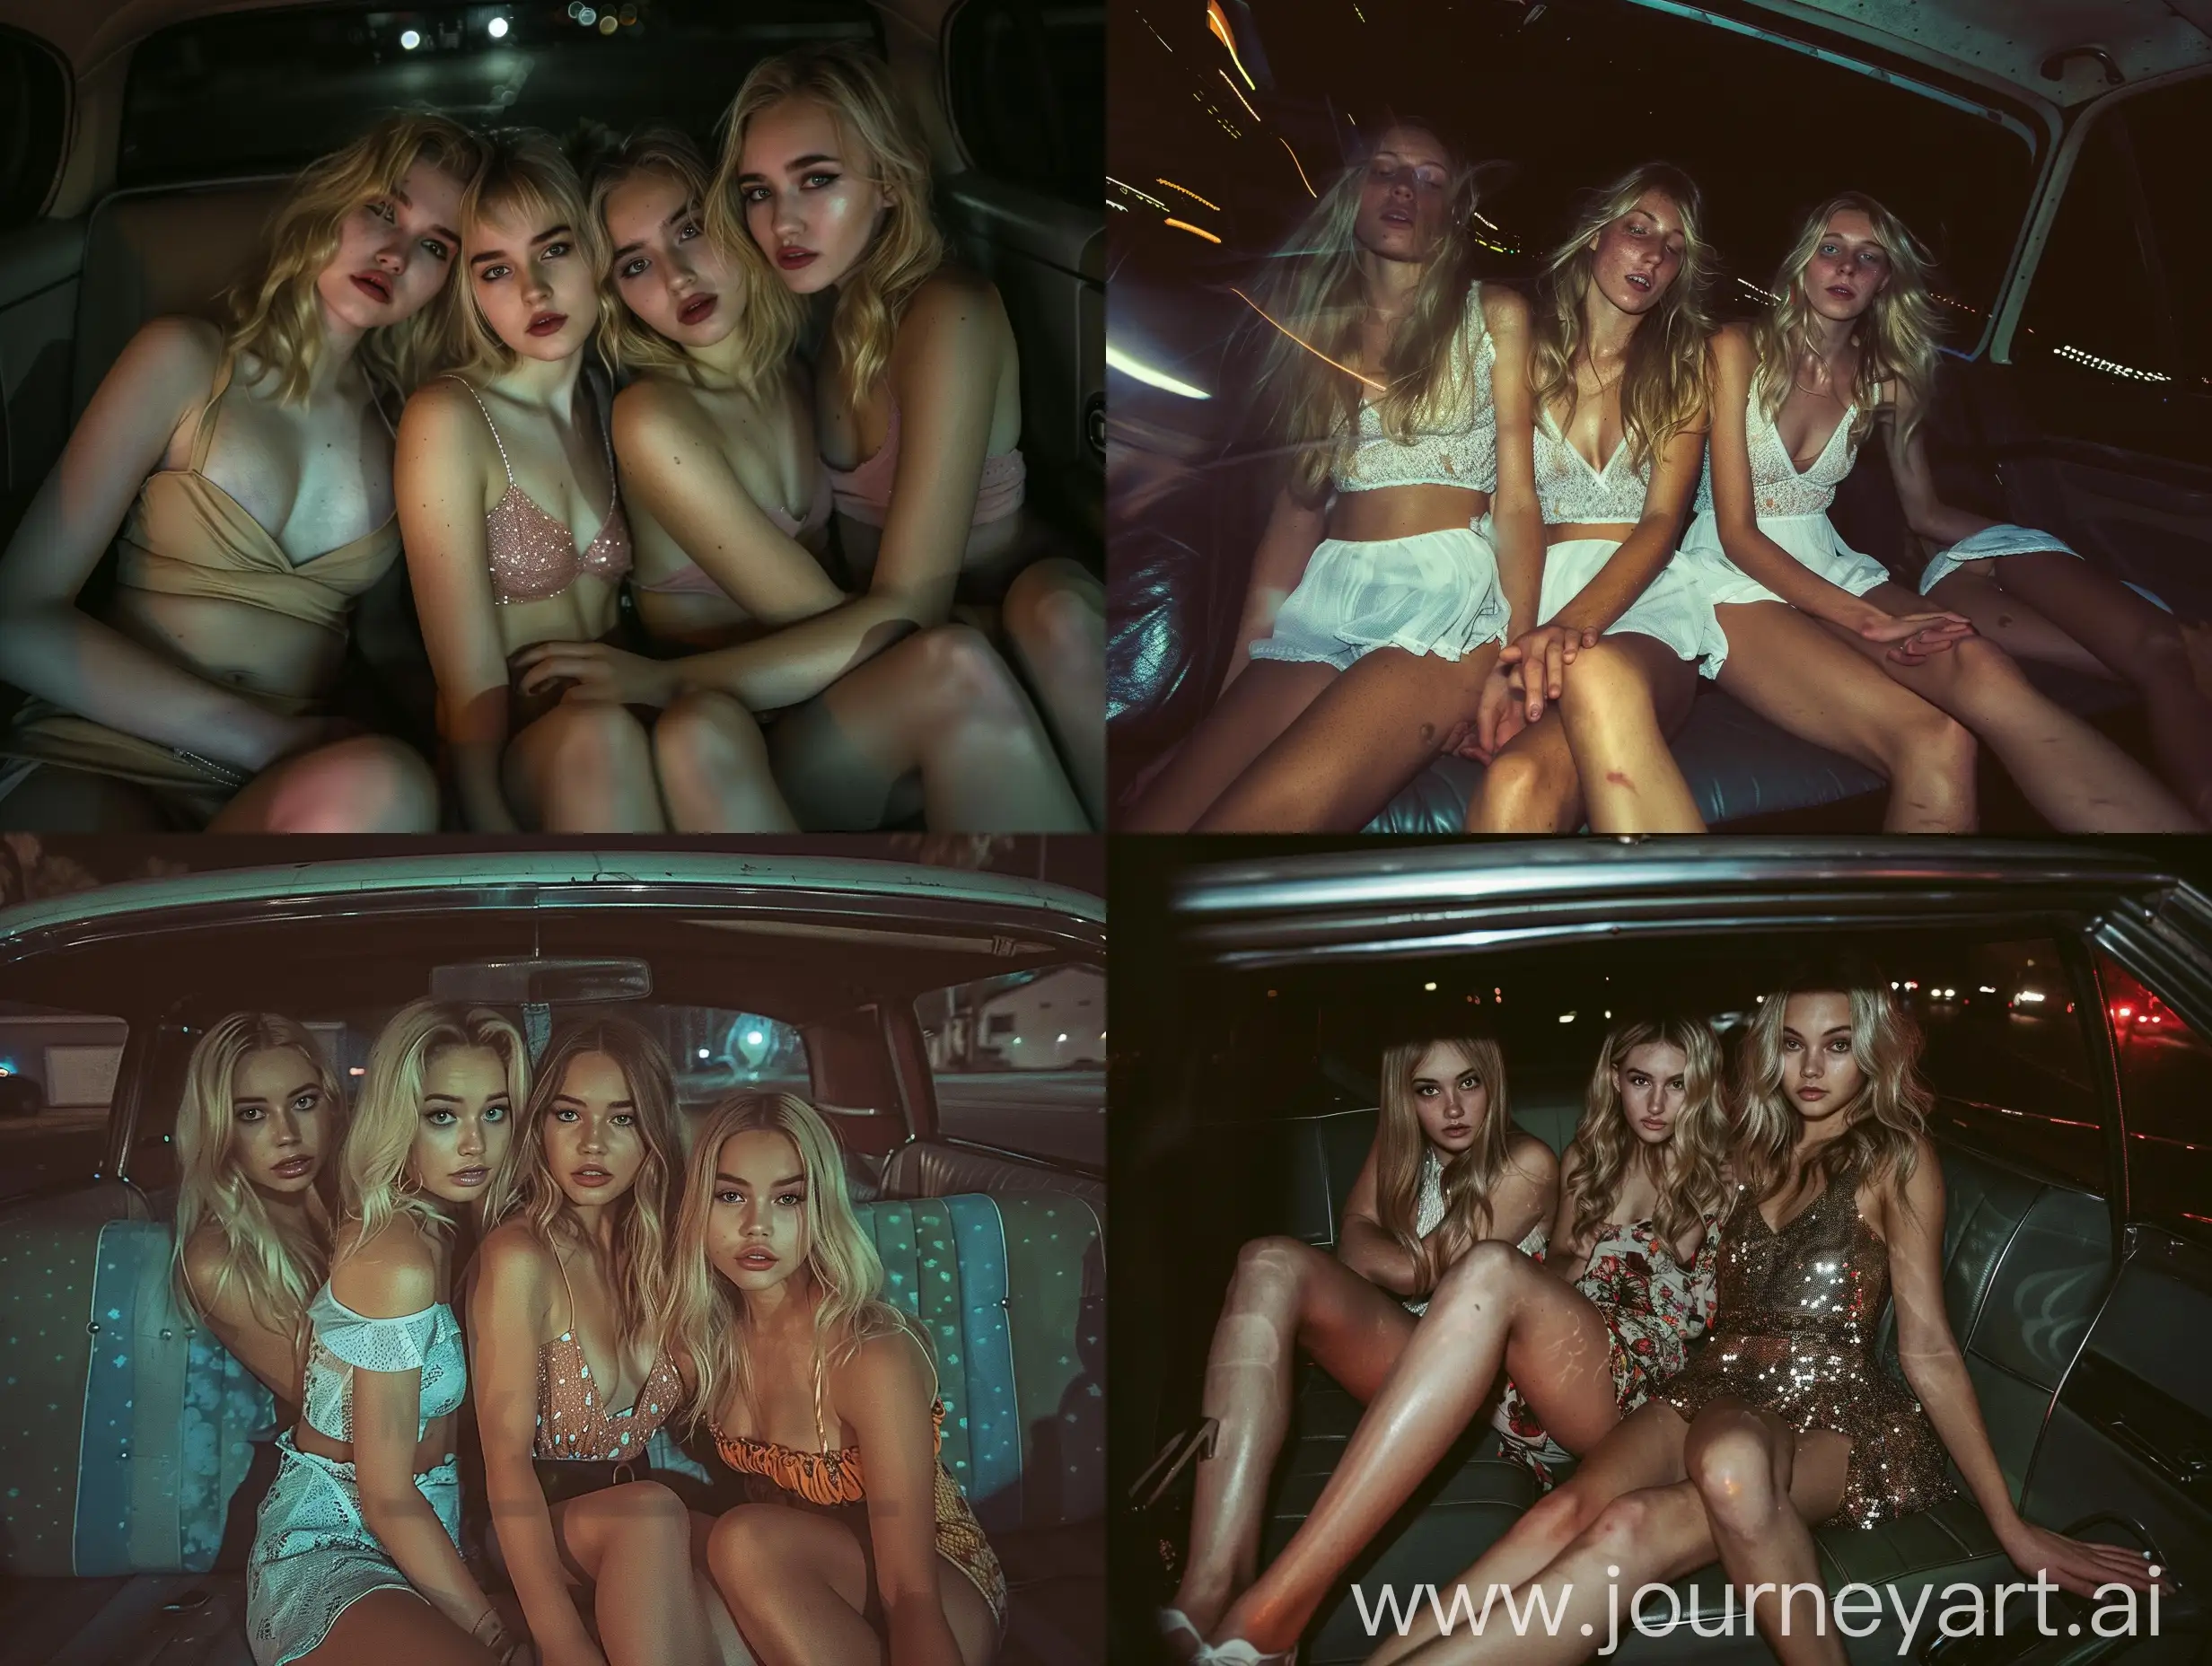 Four-Young-Women-with-Blonde-Hair-in-Invisible-Dresses-Inside-Car-at-Night